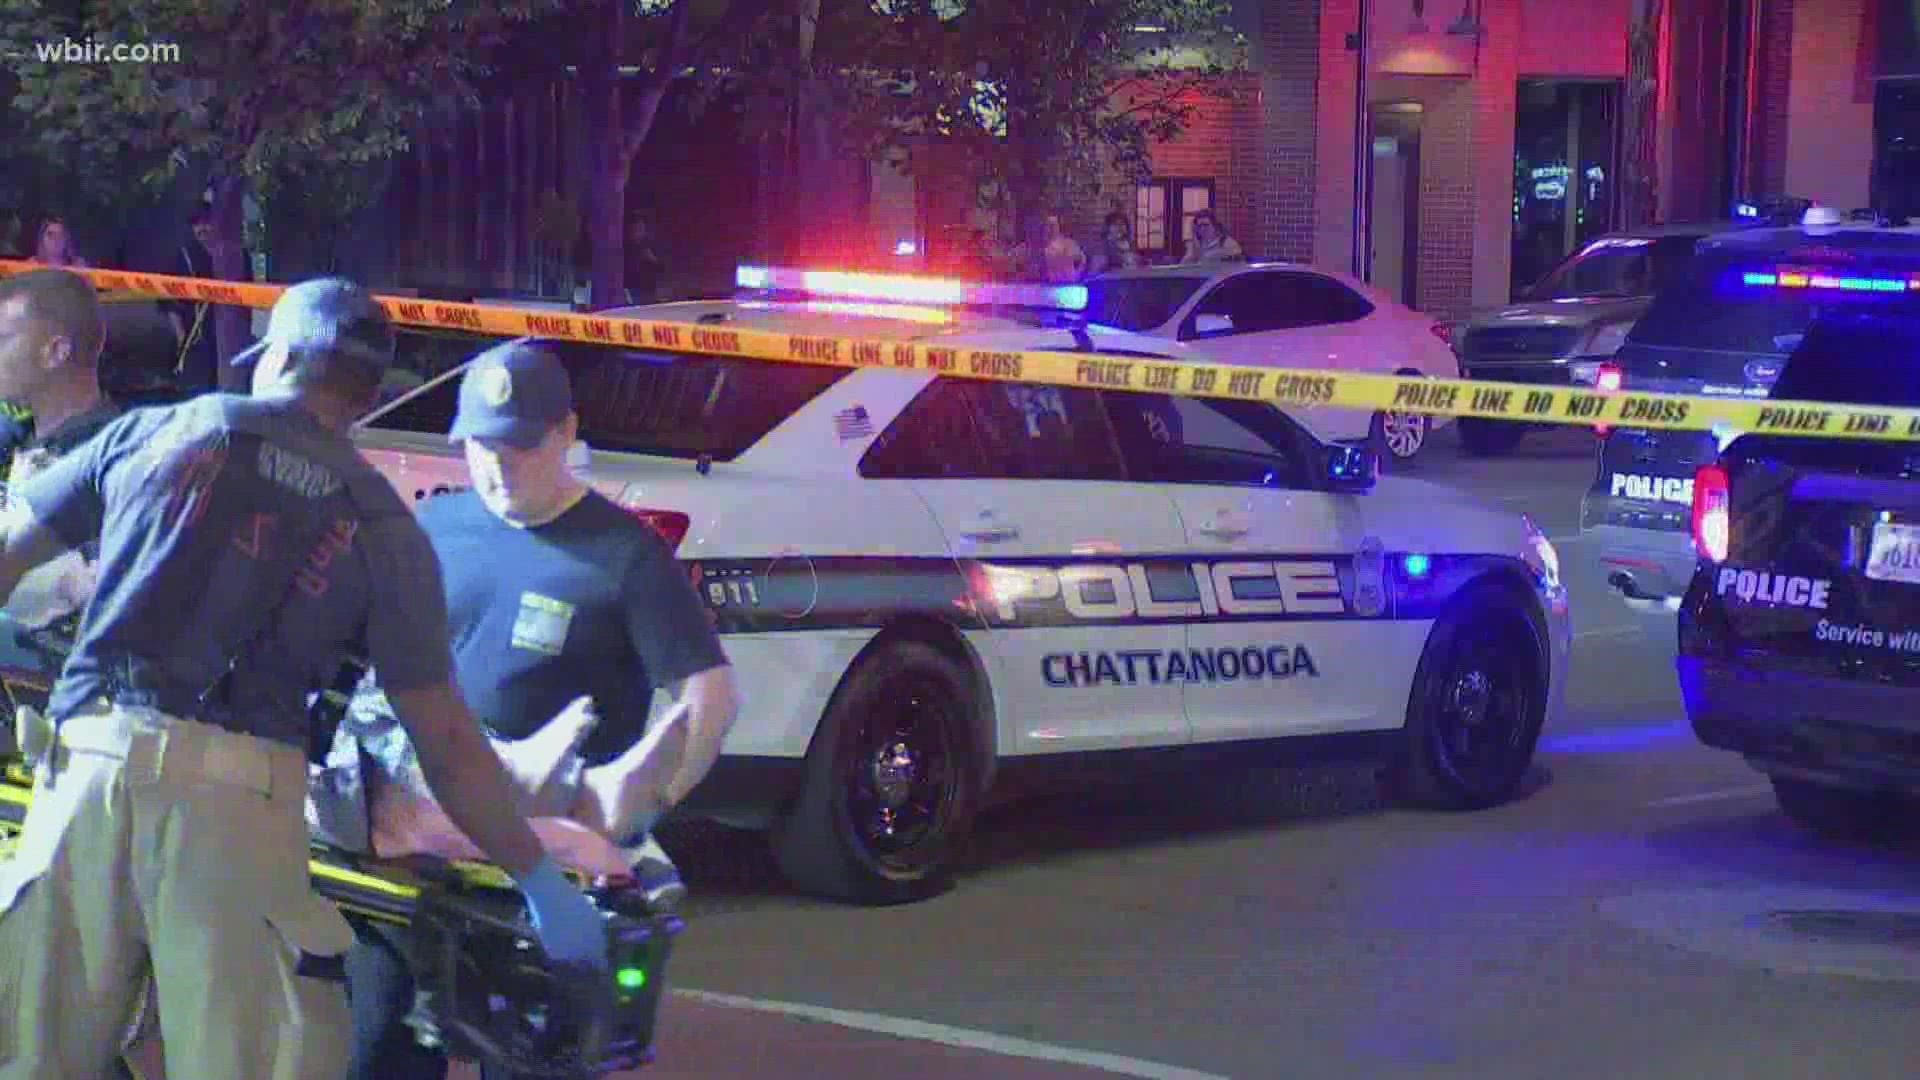 Chattanooga Police said two people remain in the hospital in critical condition.